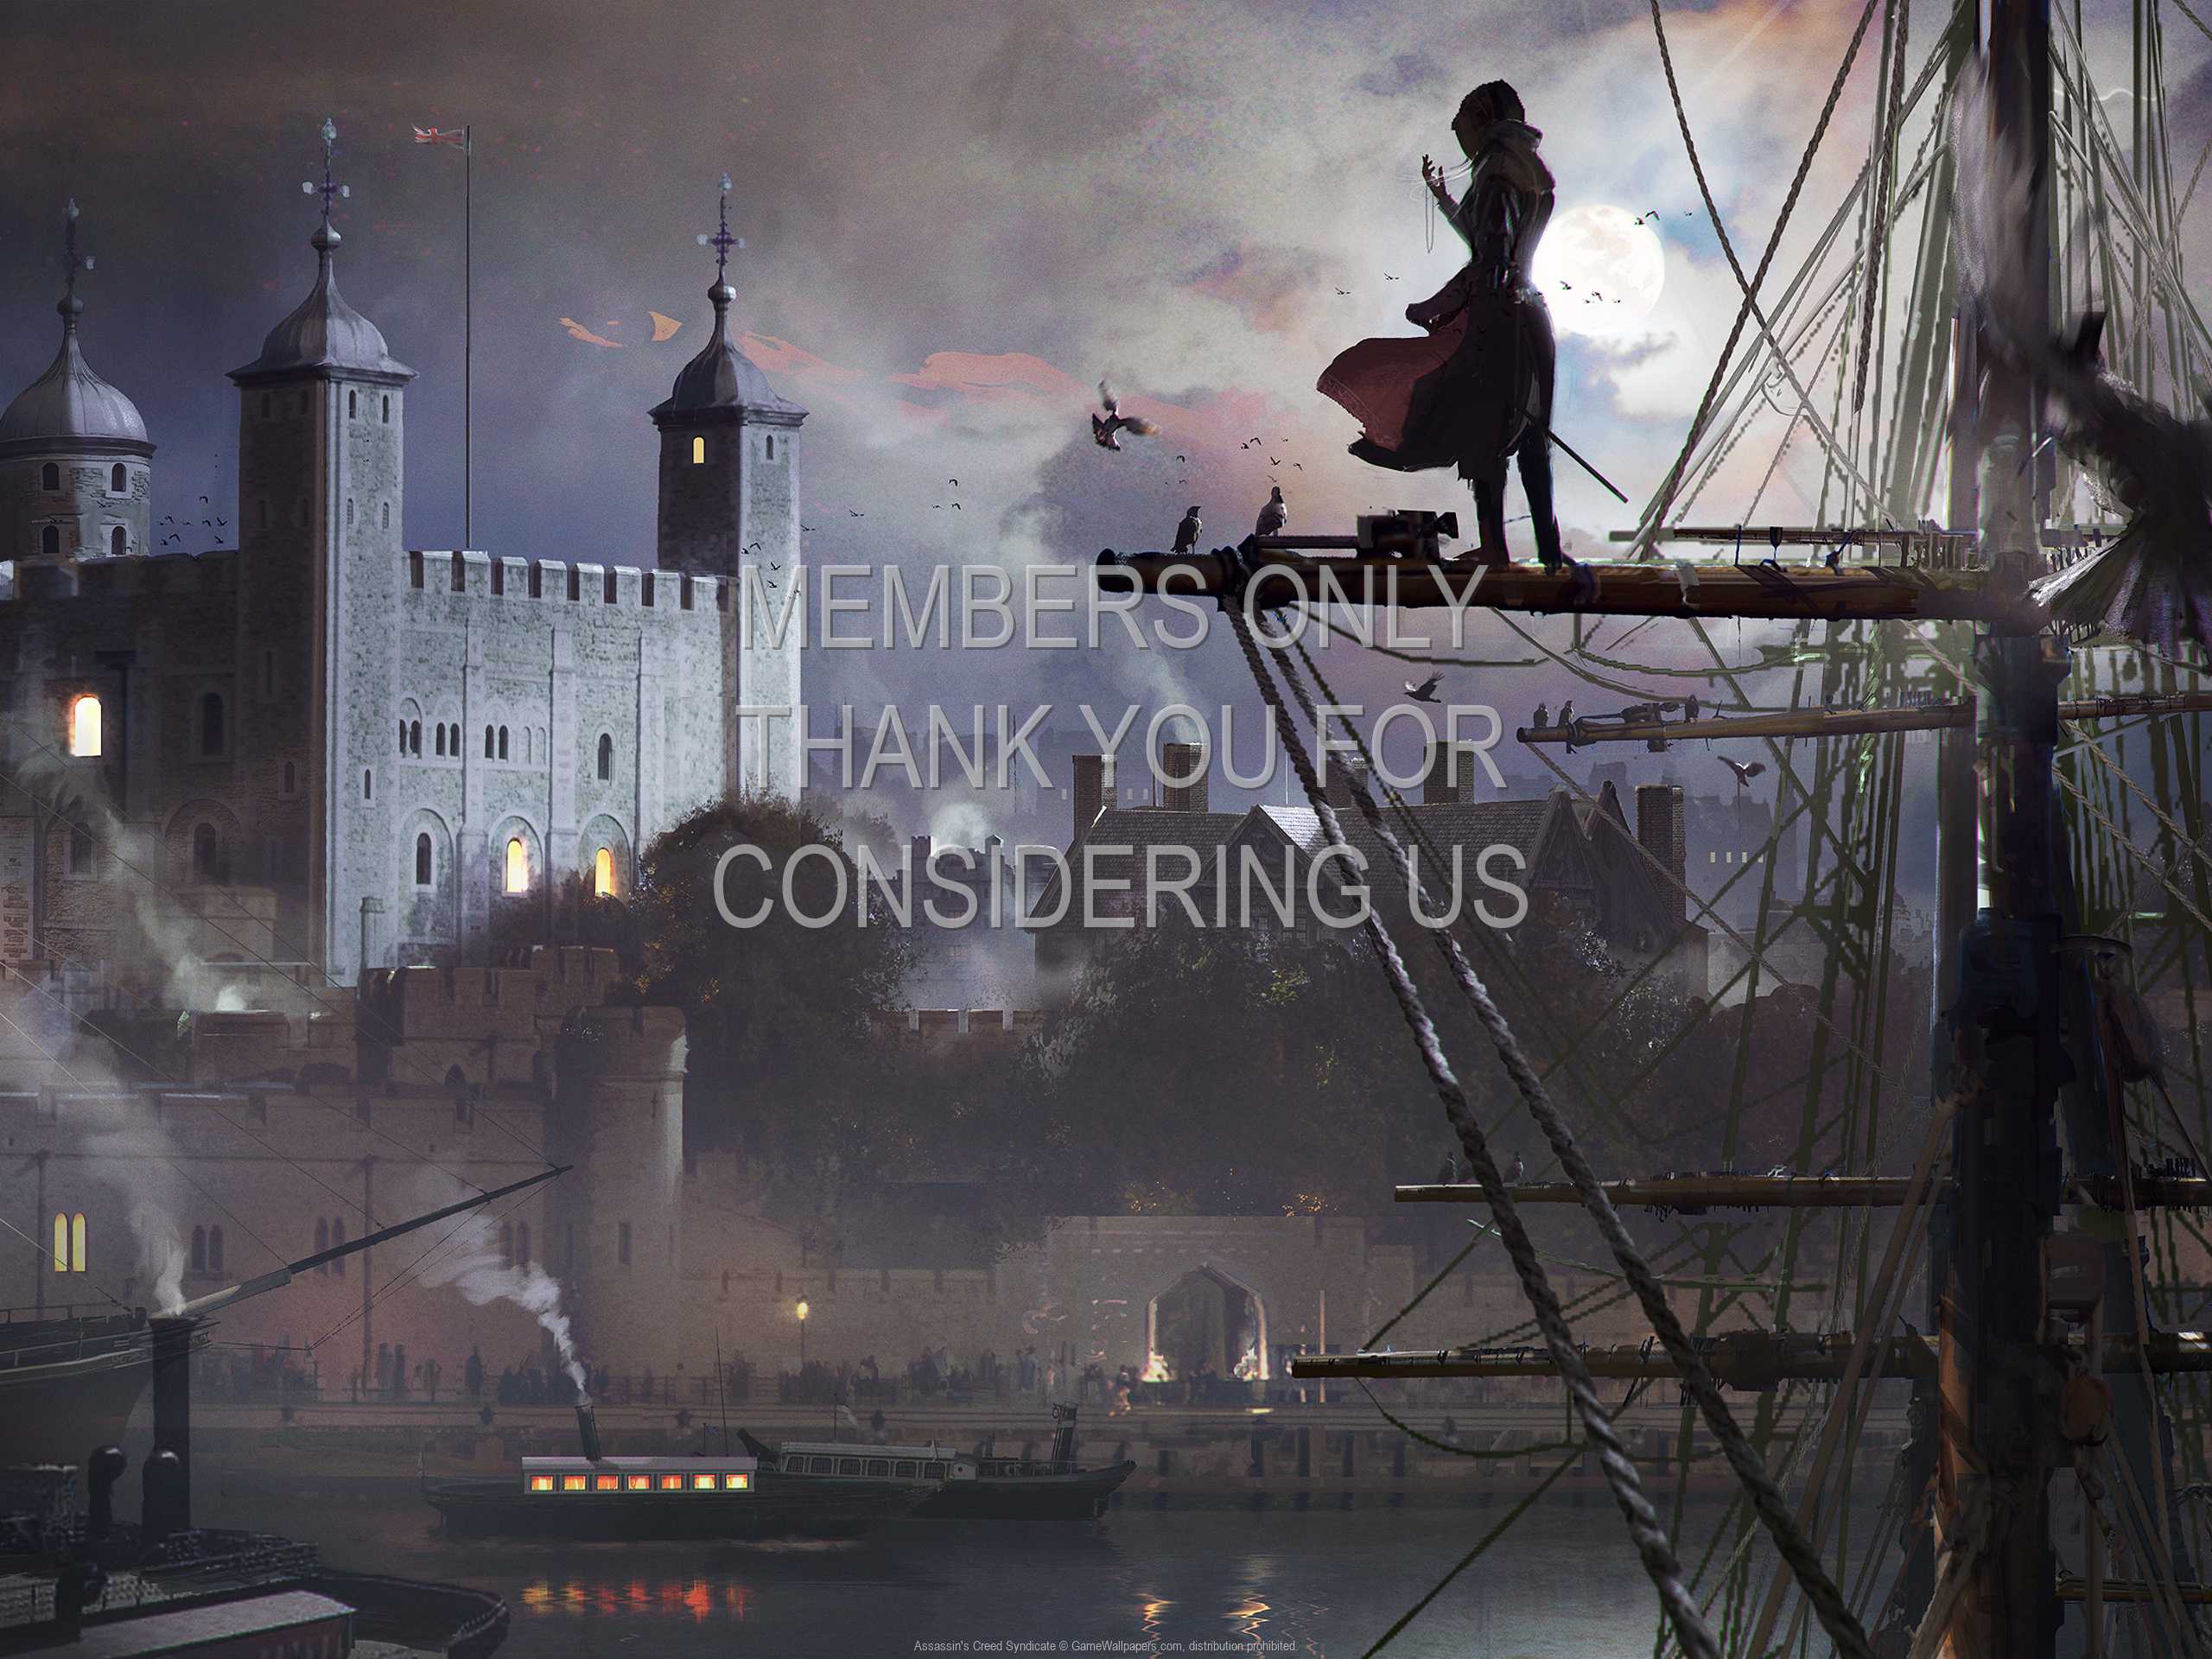 assassins creed syndicateWallpapers